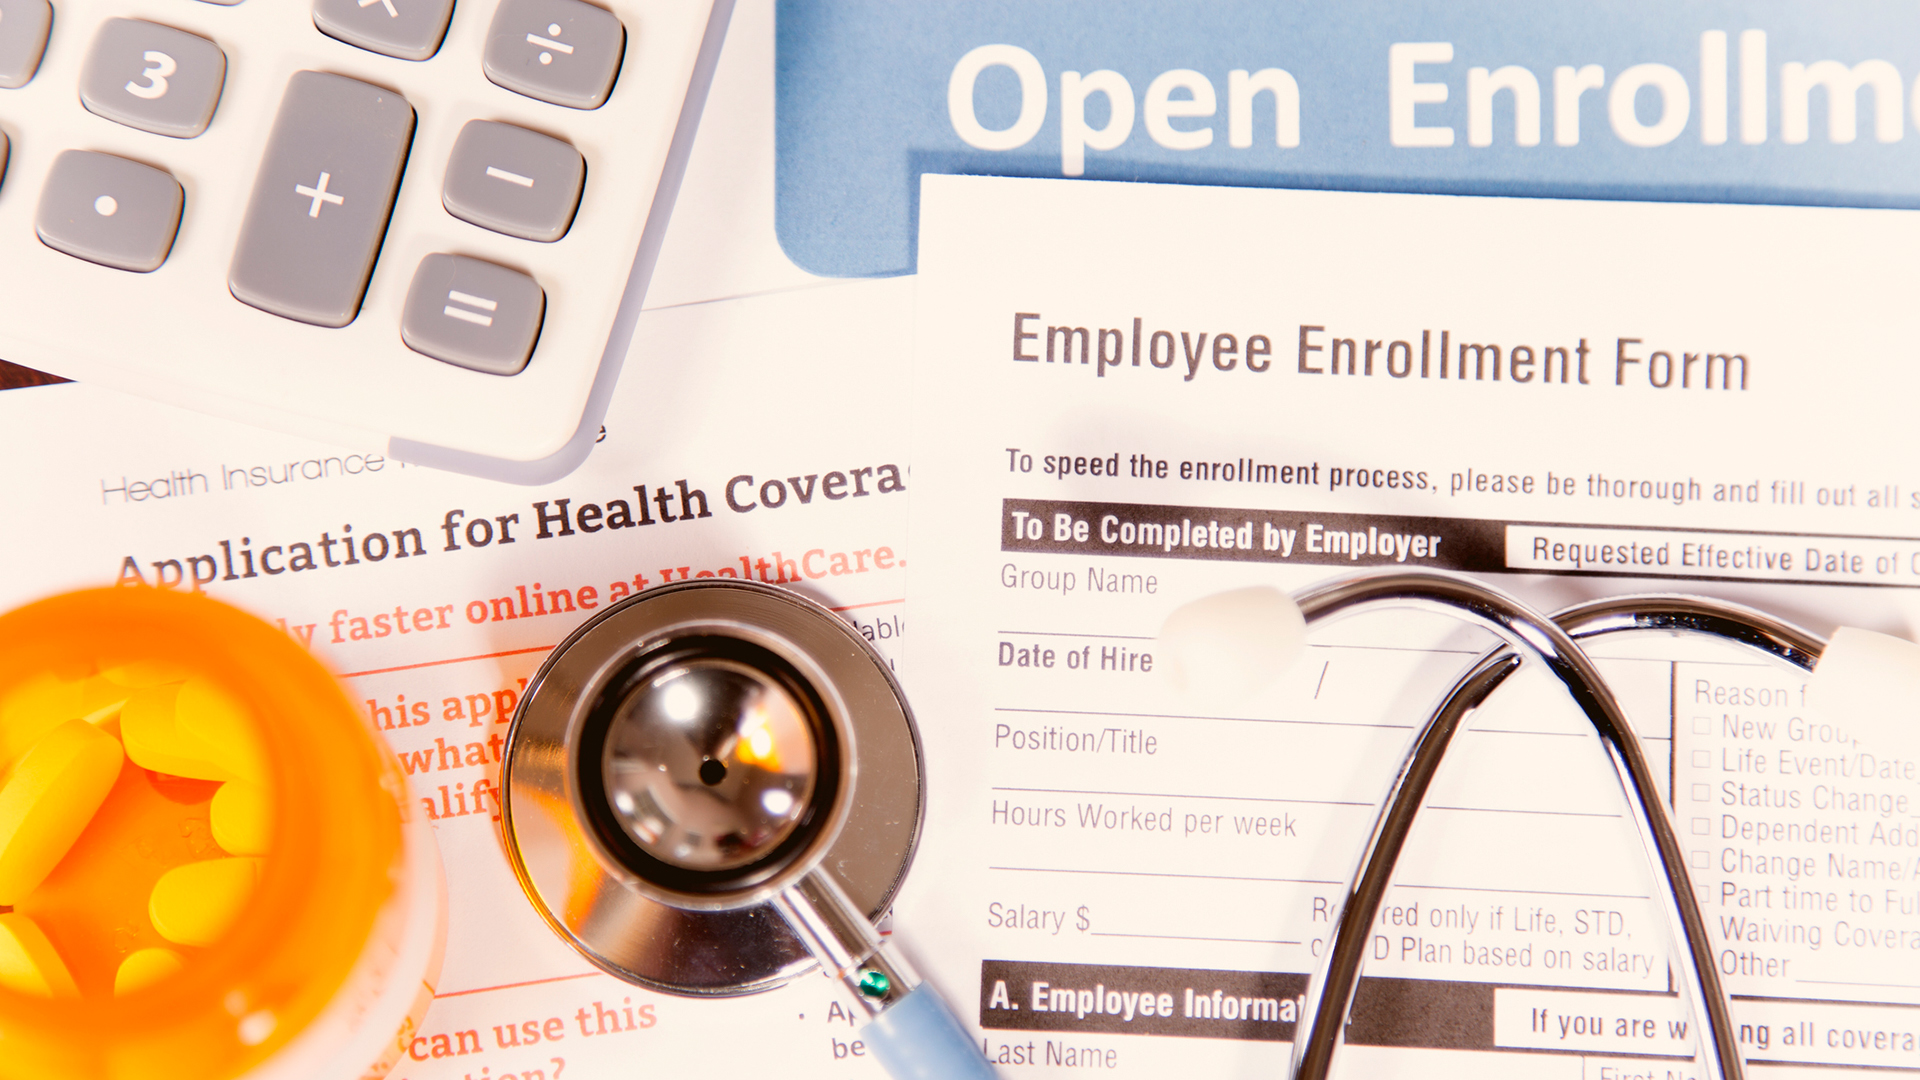 What Percentage of U.S. Businesses Provide Health Insurance to Employees?